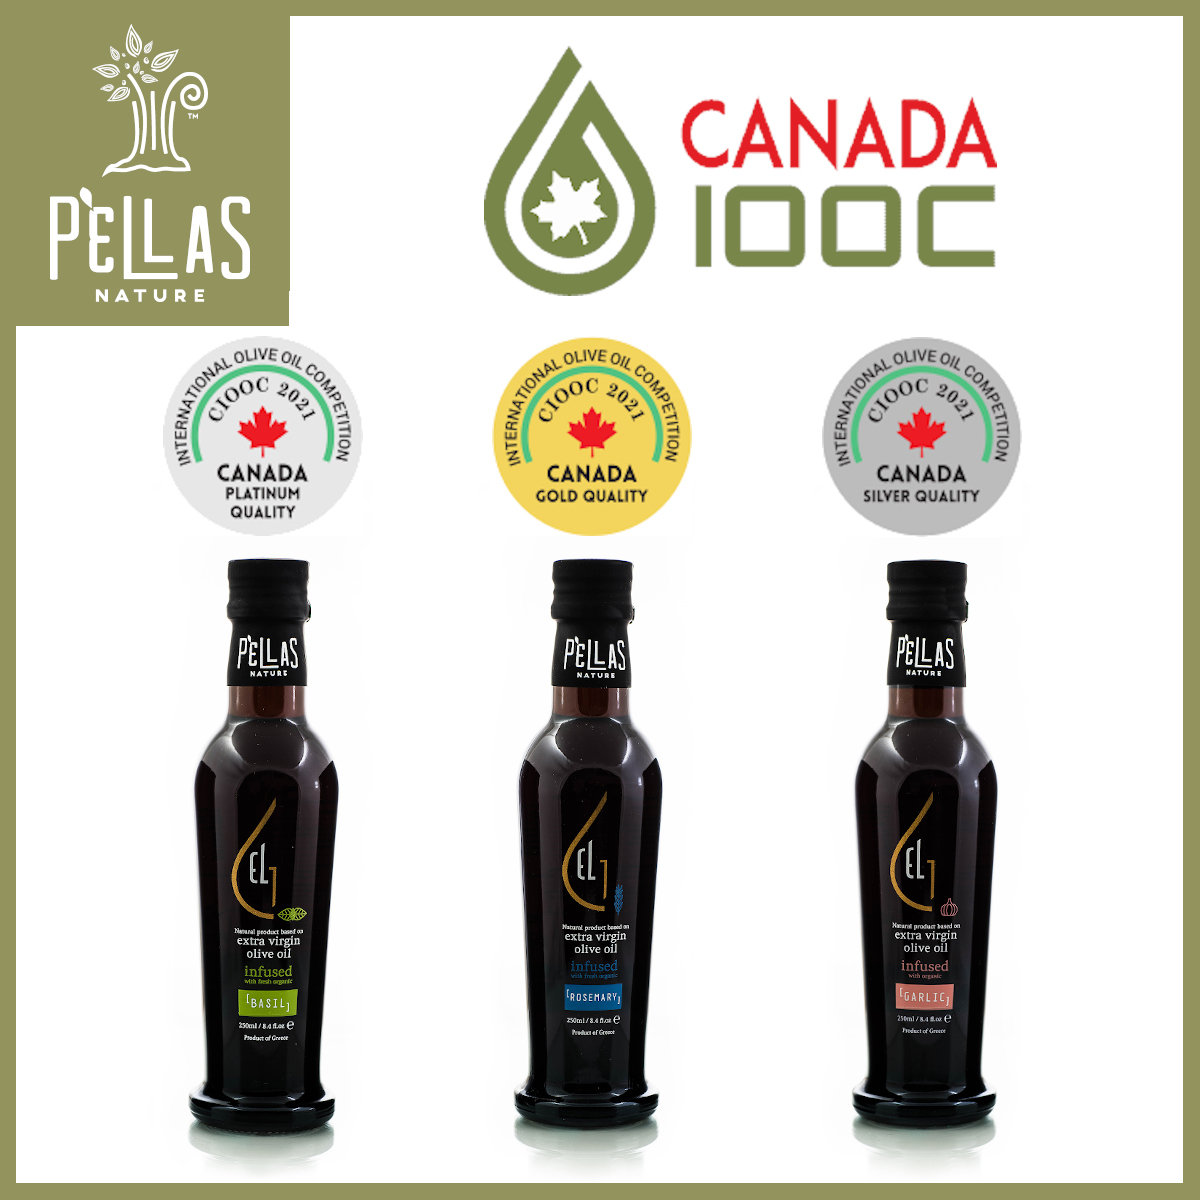 One Platinum, one Gold and One Silver Award at Canada IOOC 2021